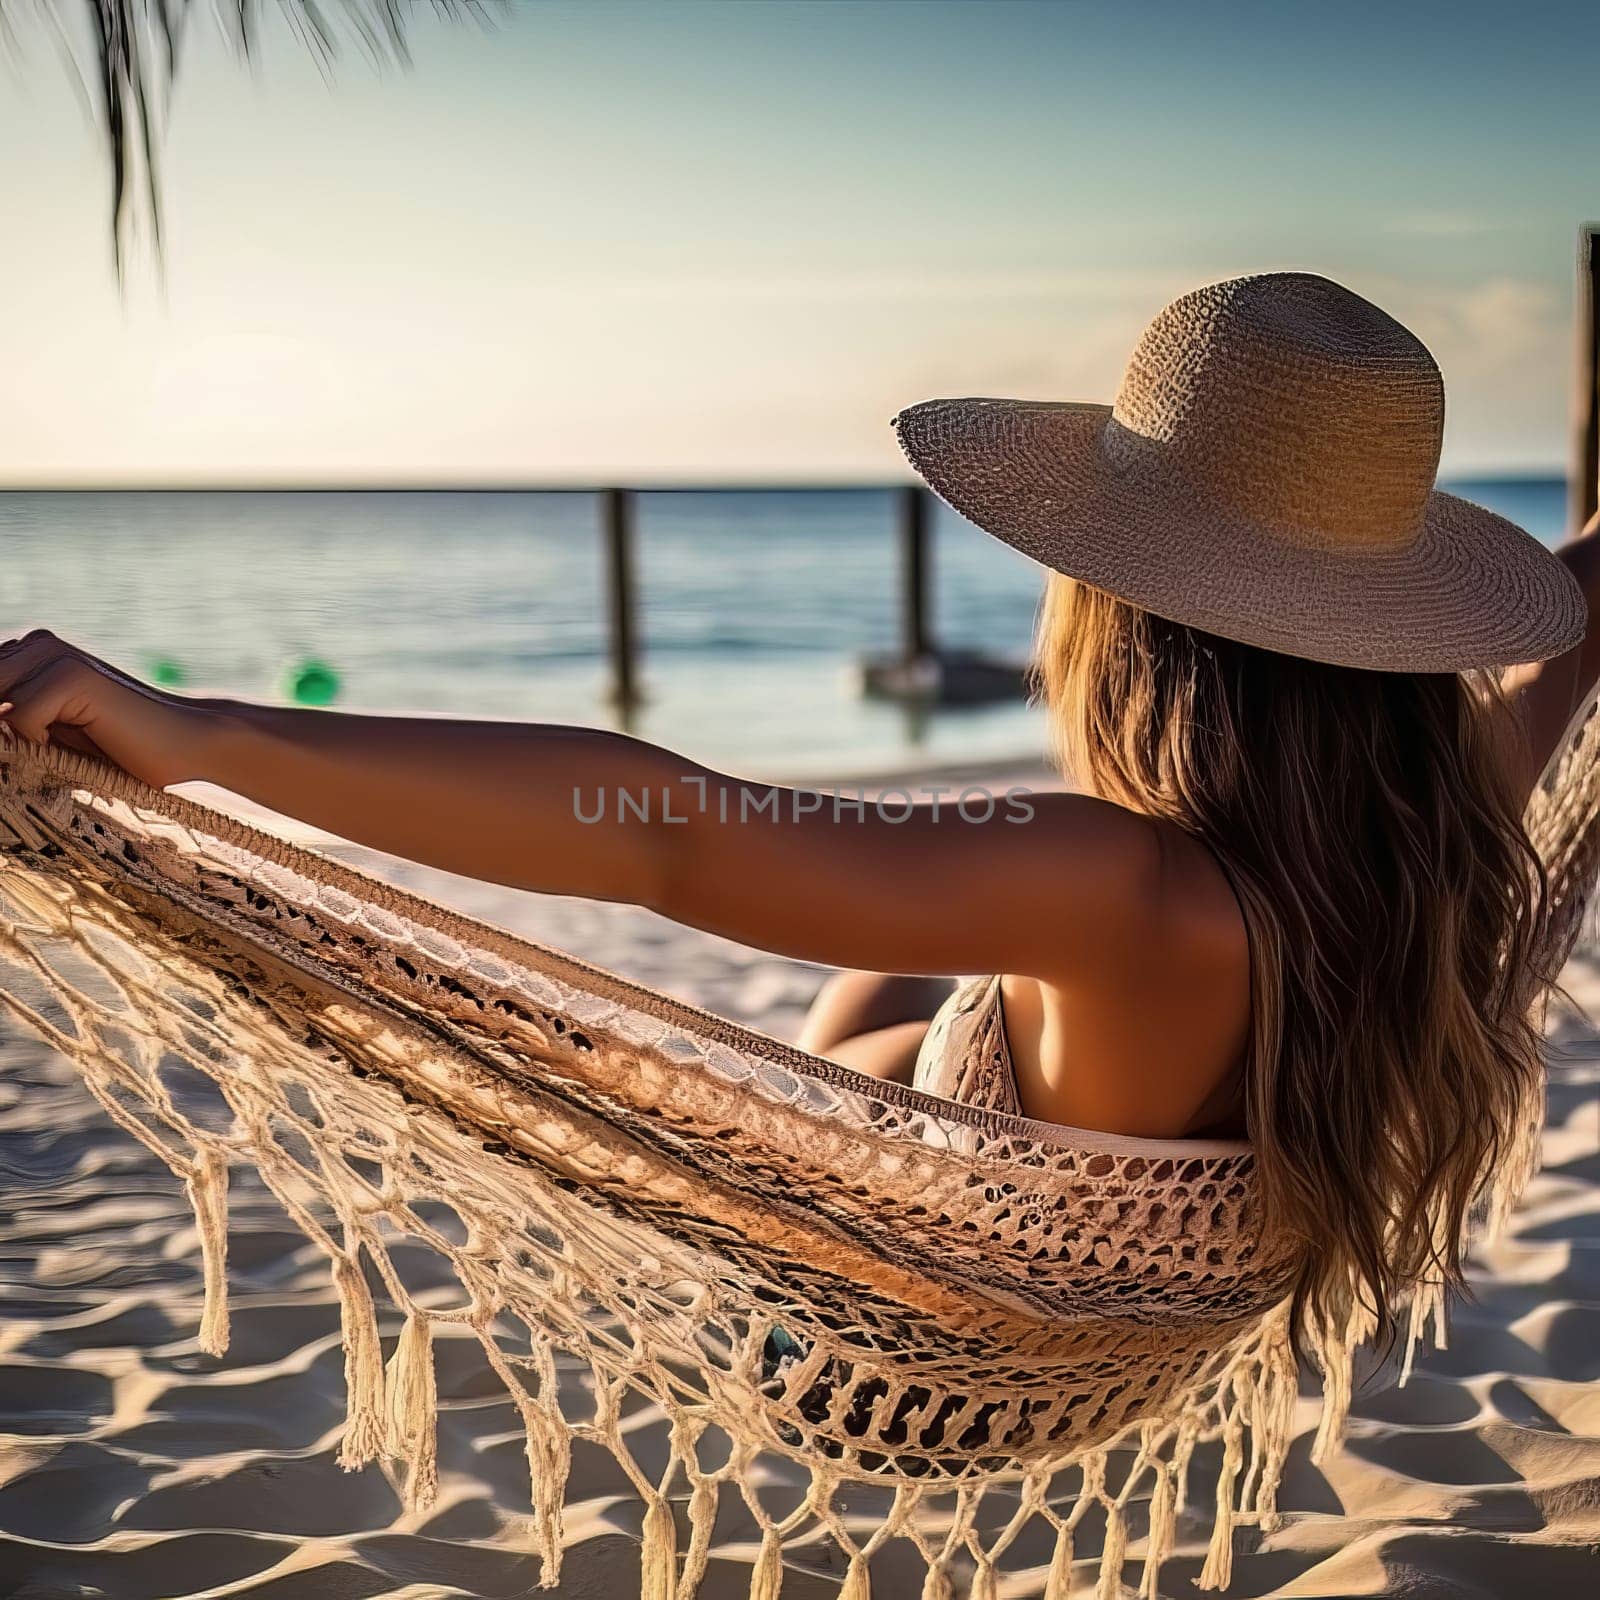 A woman in a hammock on a beach at sunset.